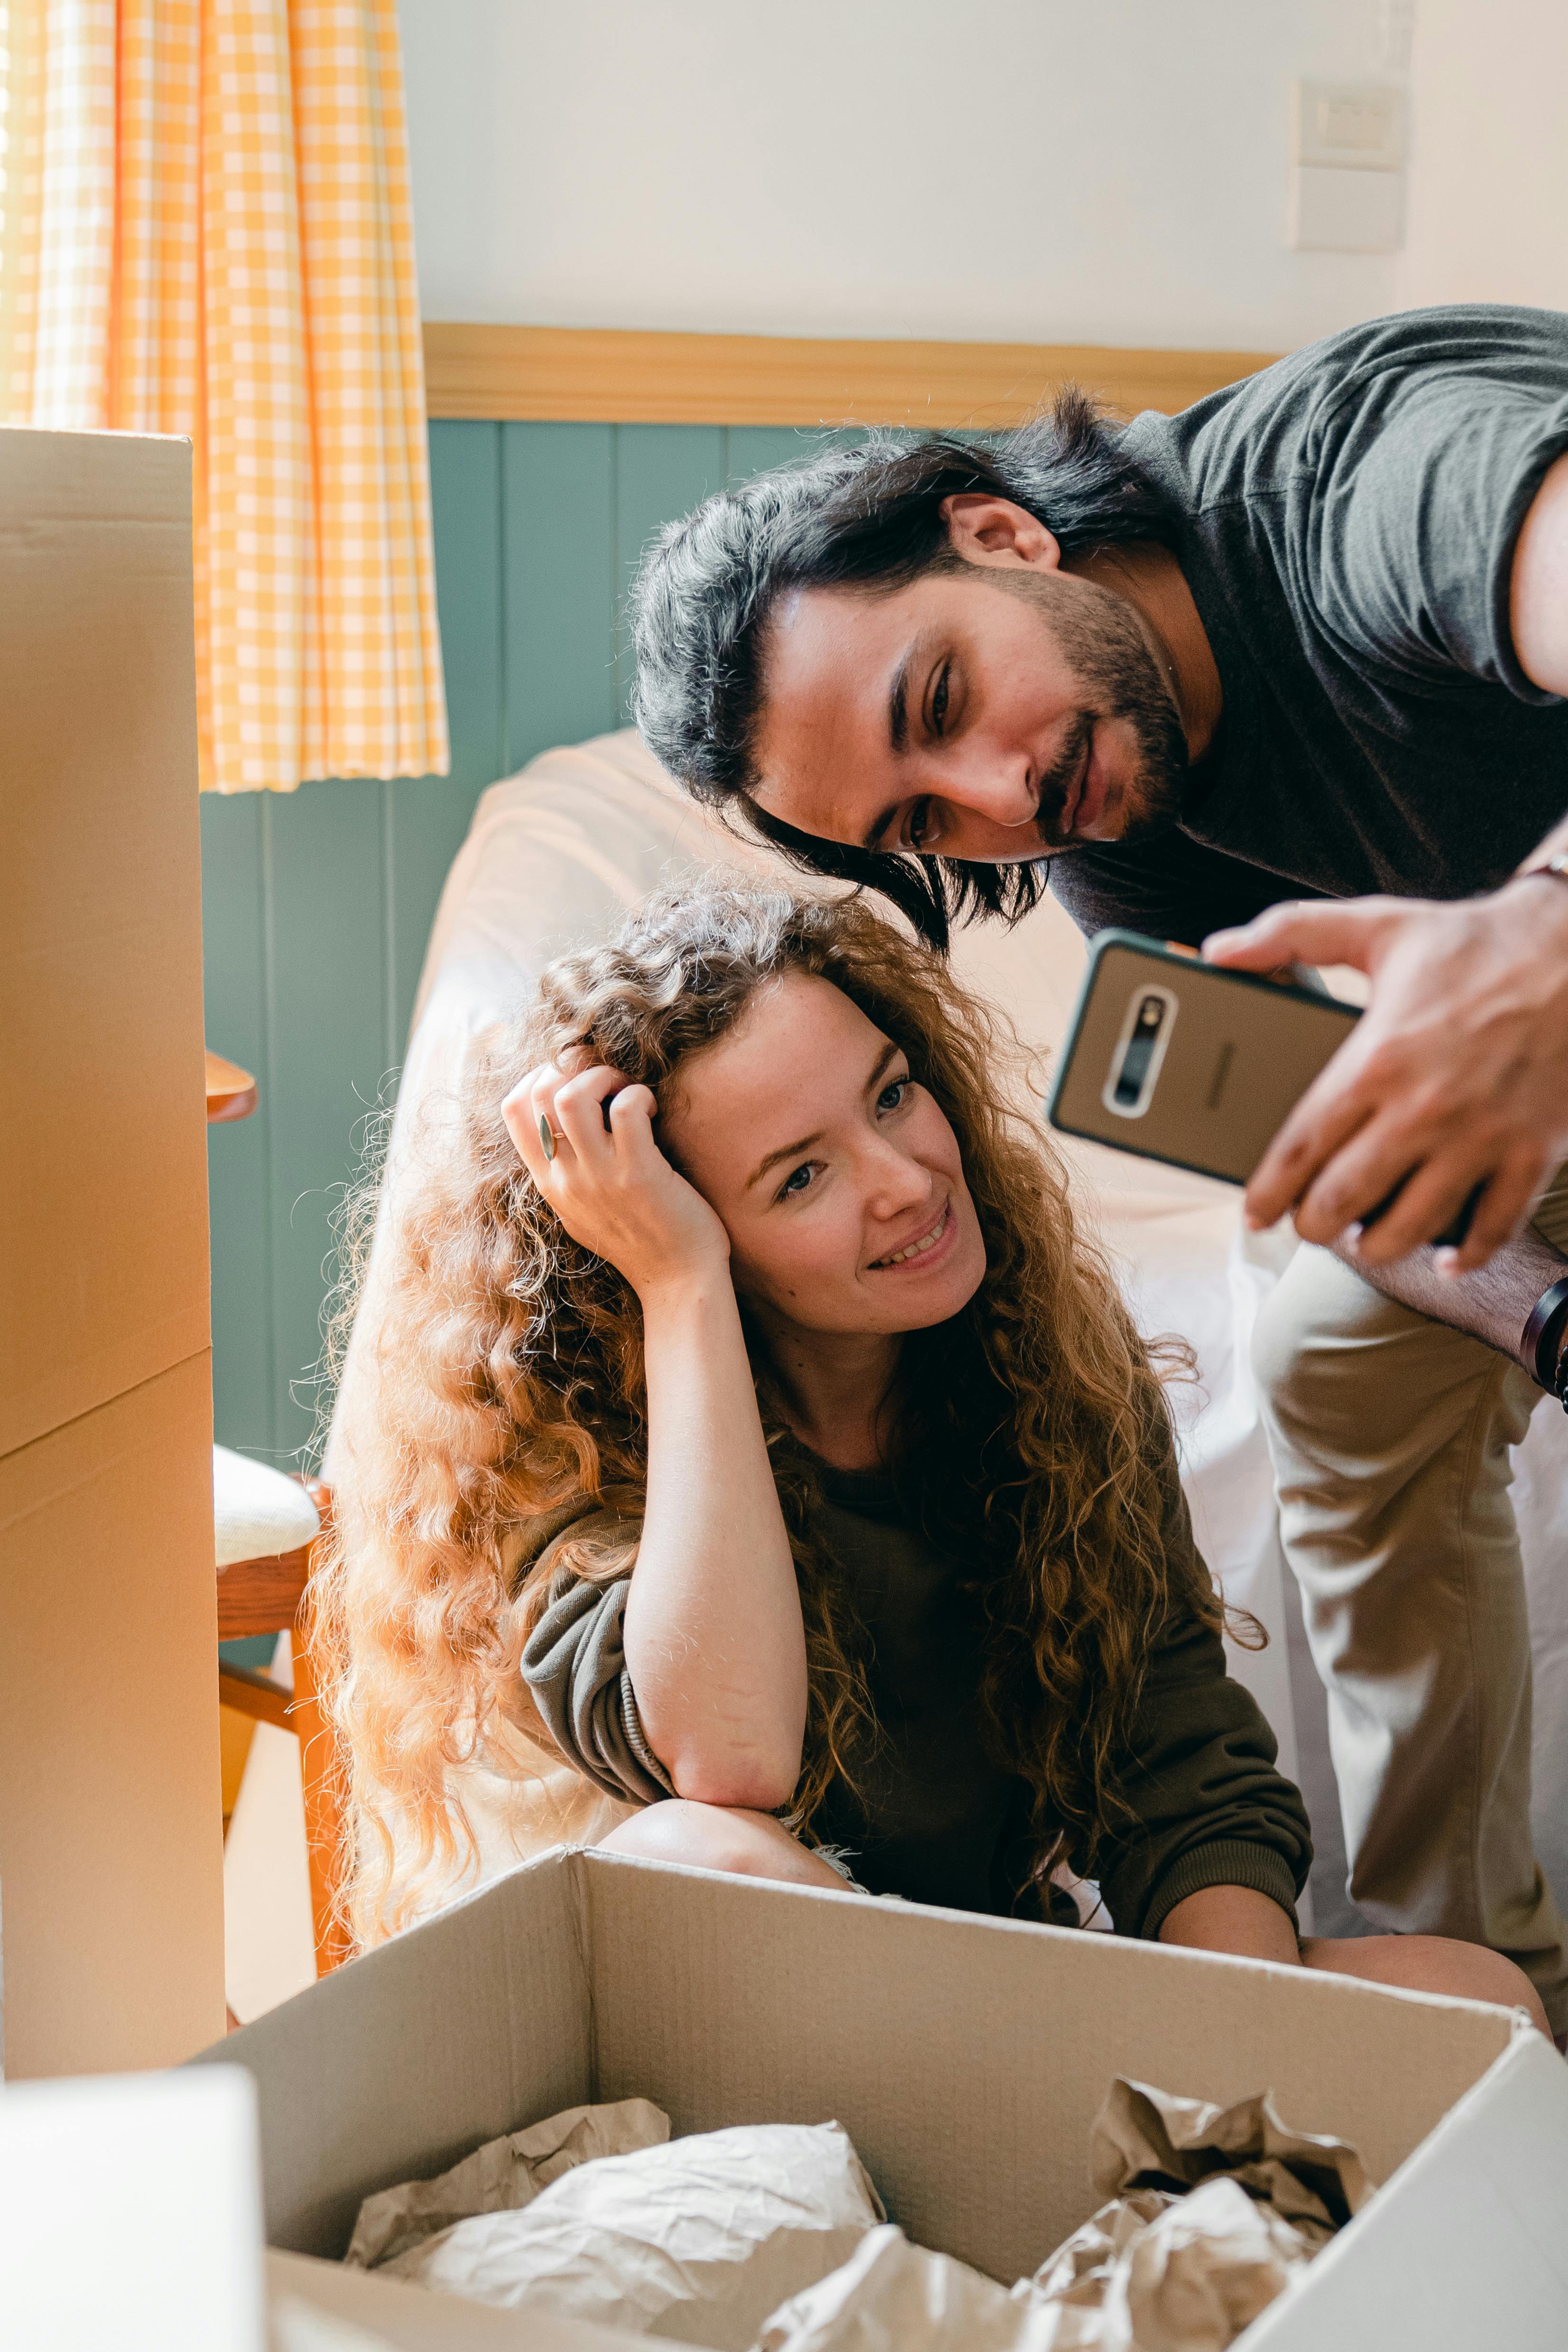 multiracial couple taking selfie on smartphone while unpacking in new home